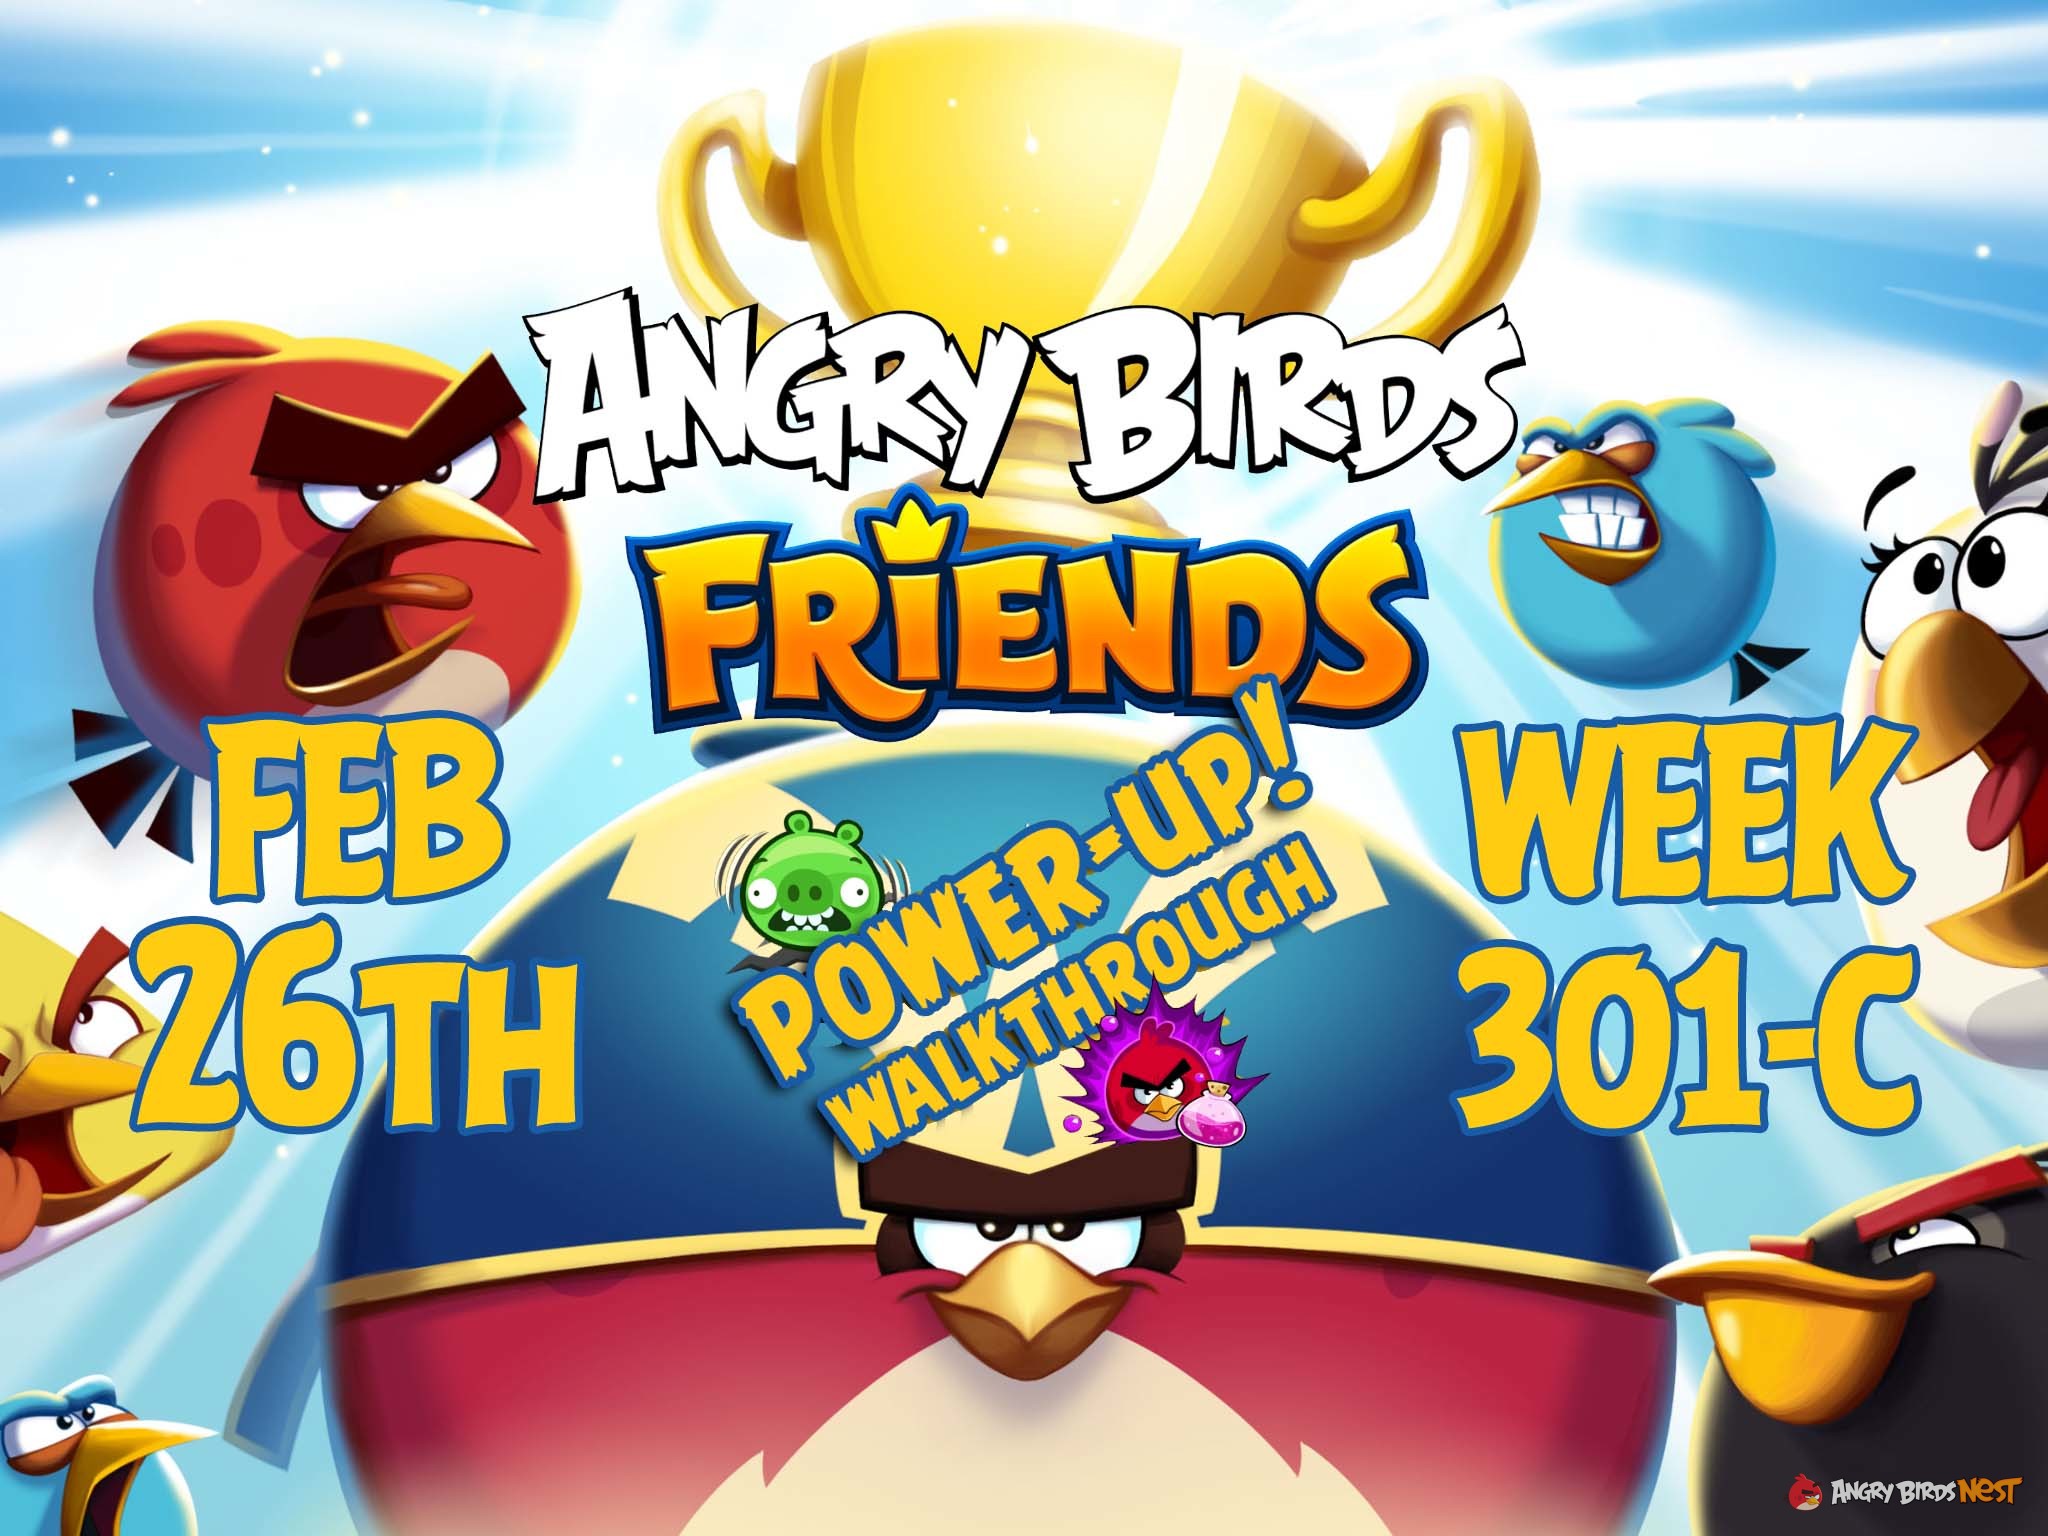 Angry Birds Friends Tournament Week 301-C Feature Image PU